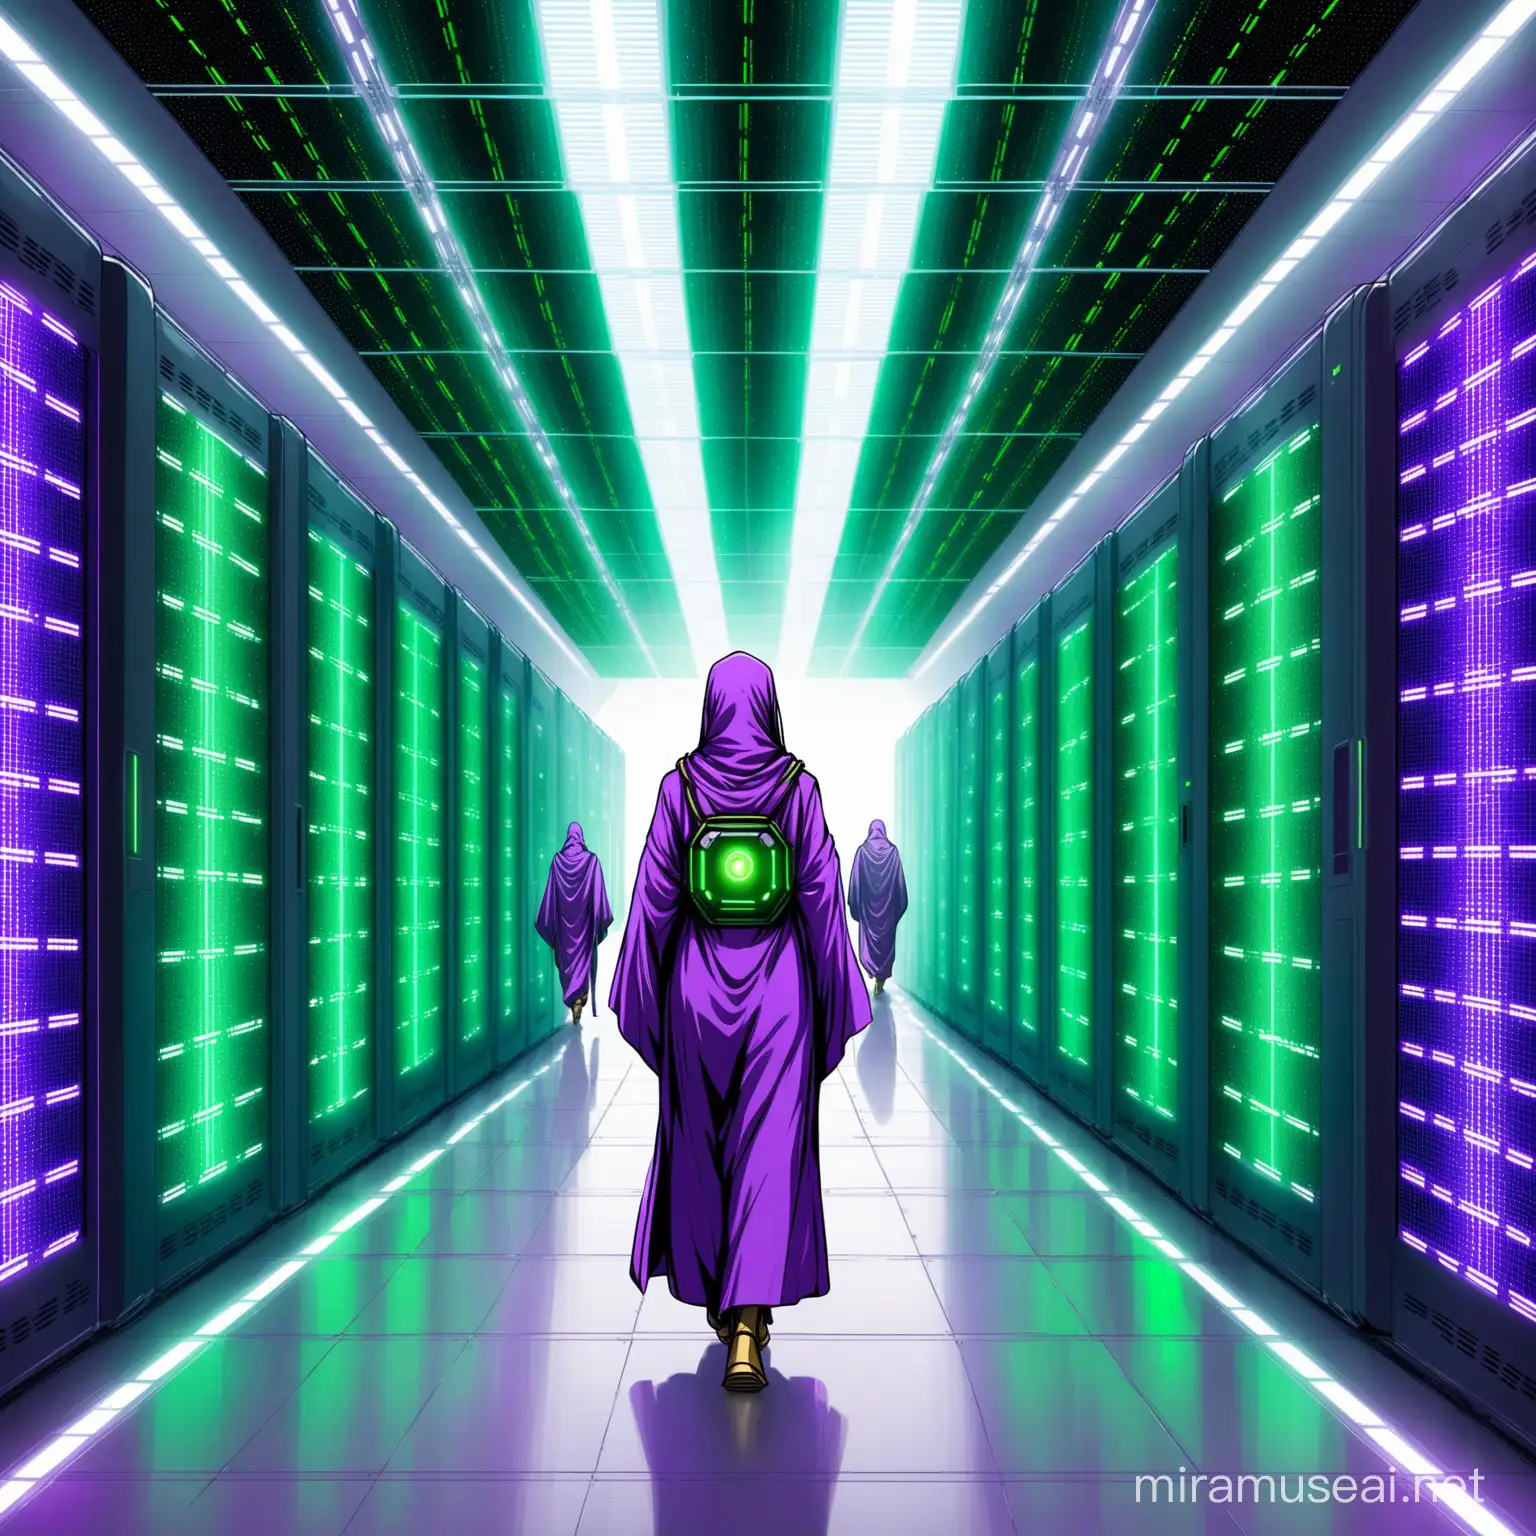 futuristic android human hybrid monks in purple & green robes and long hair walking in a natural solarpunk data center